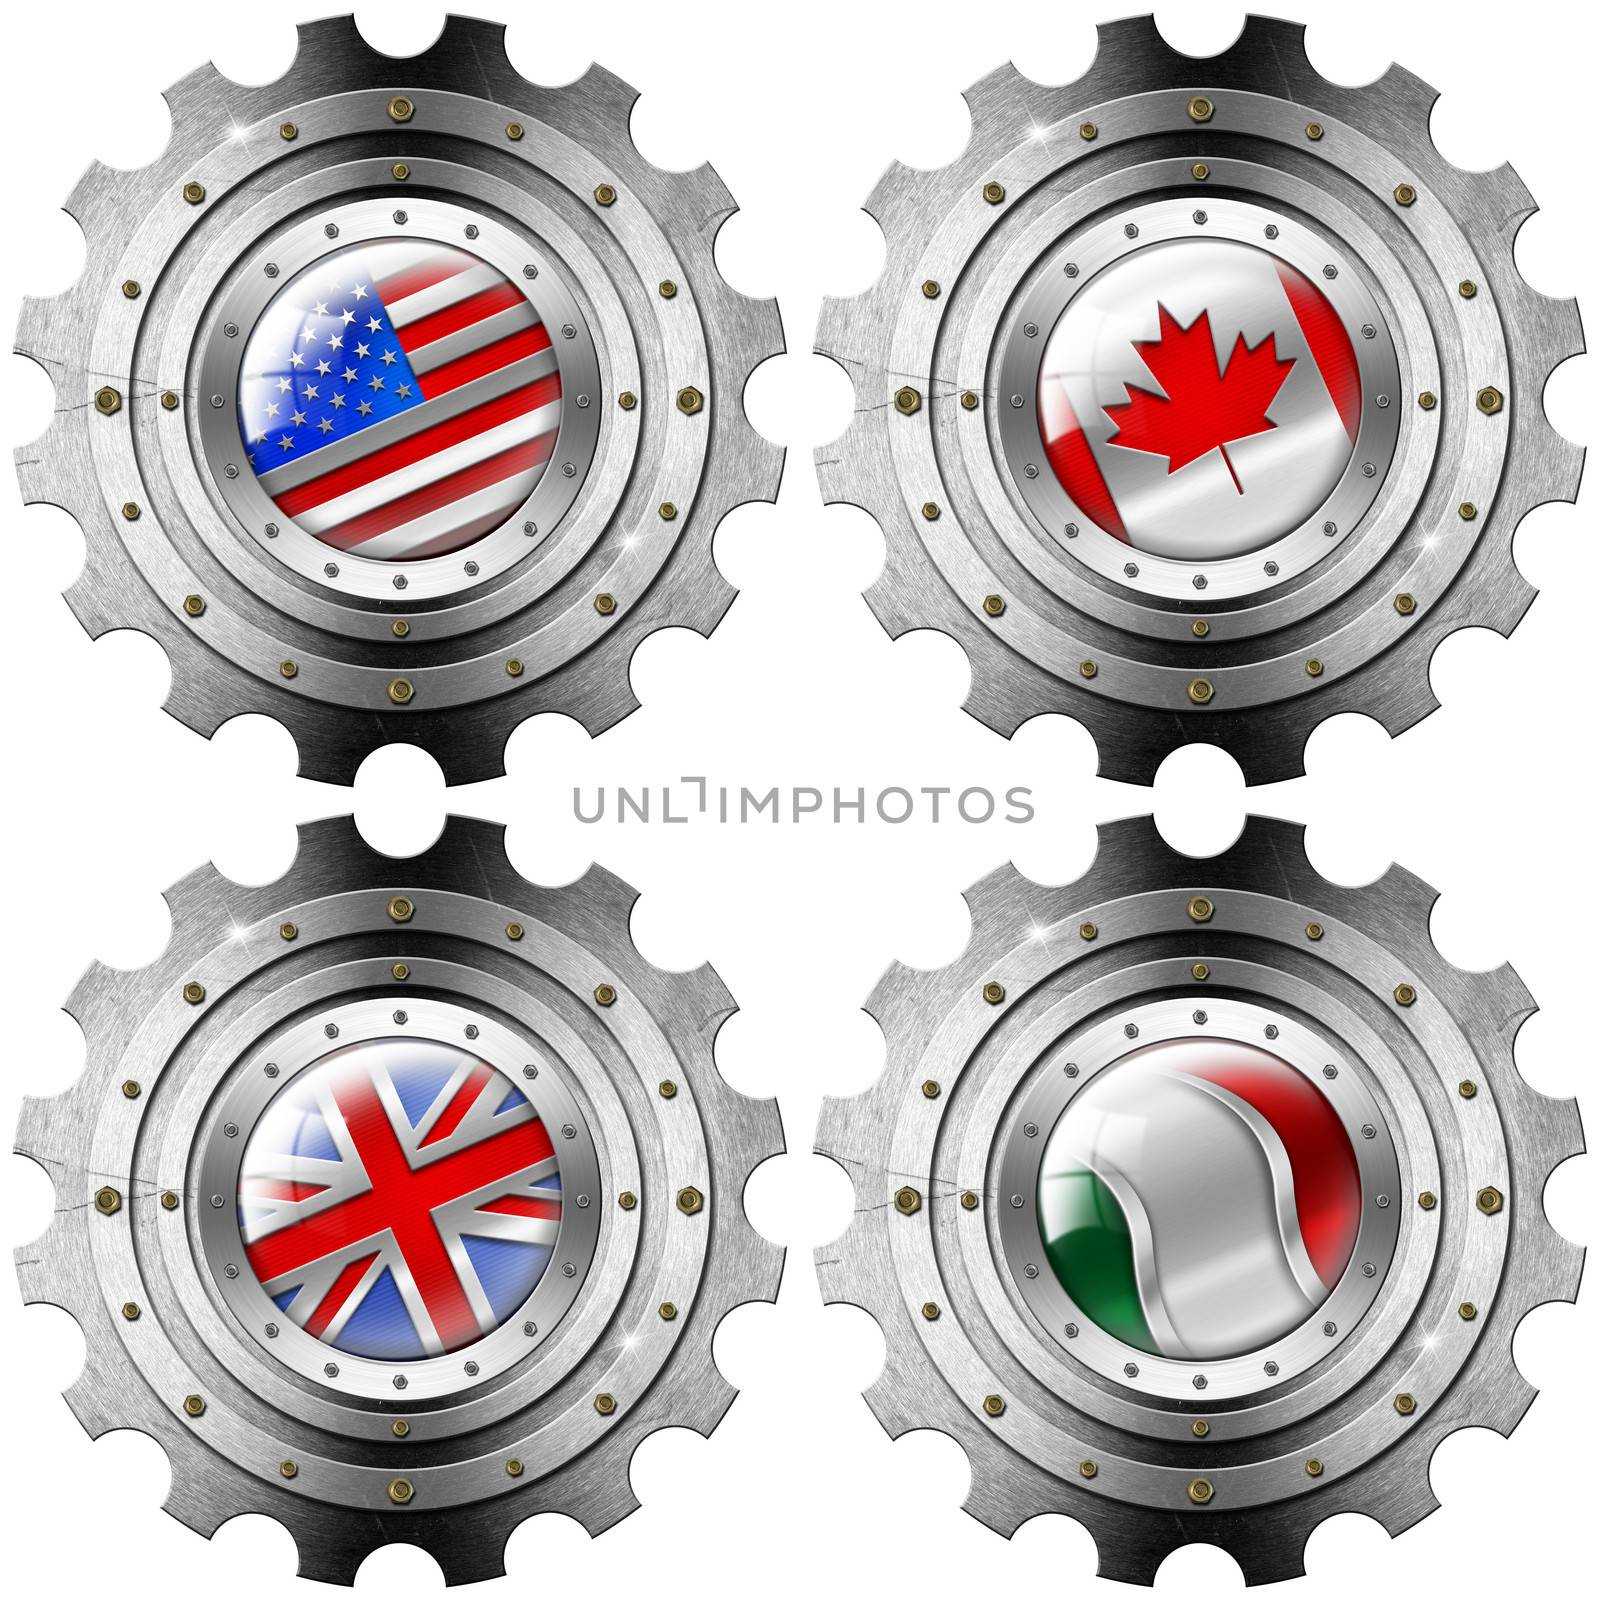 Four metal gears with the flags of: USA, UK, Canada and Italy